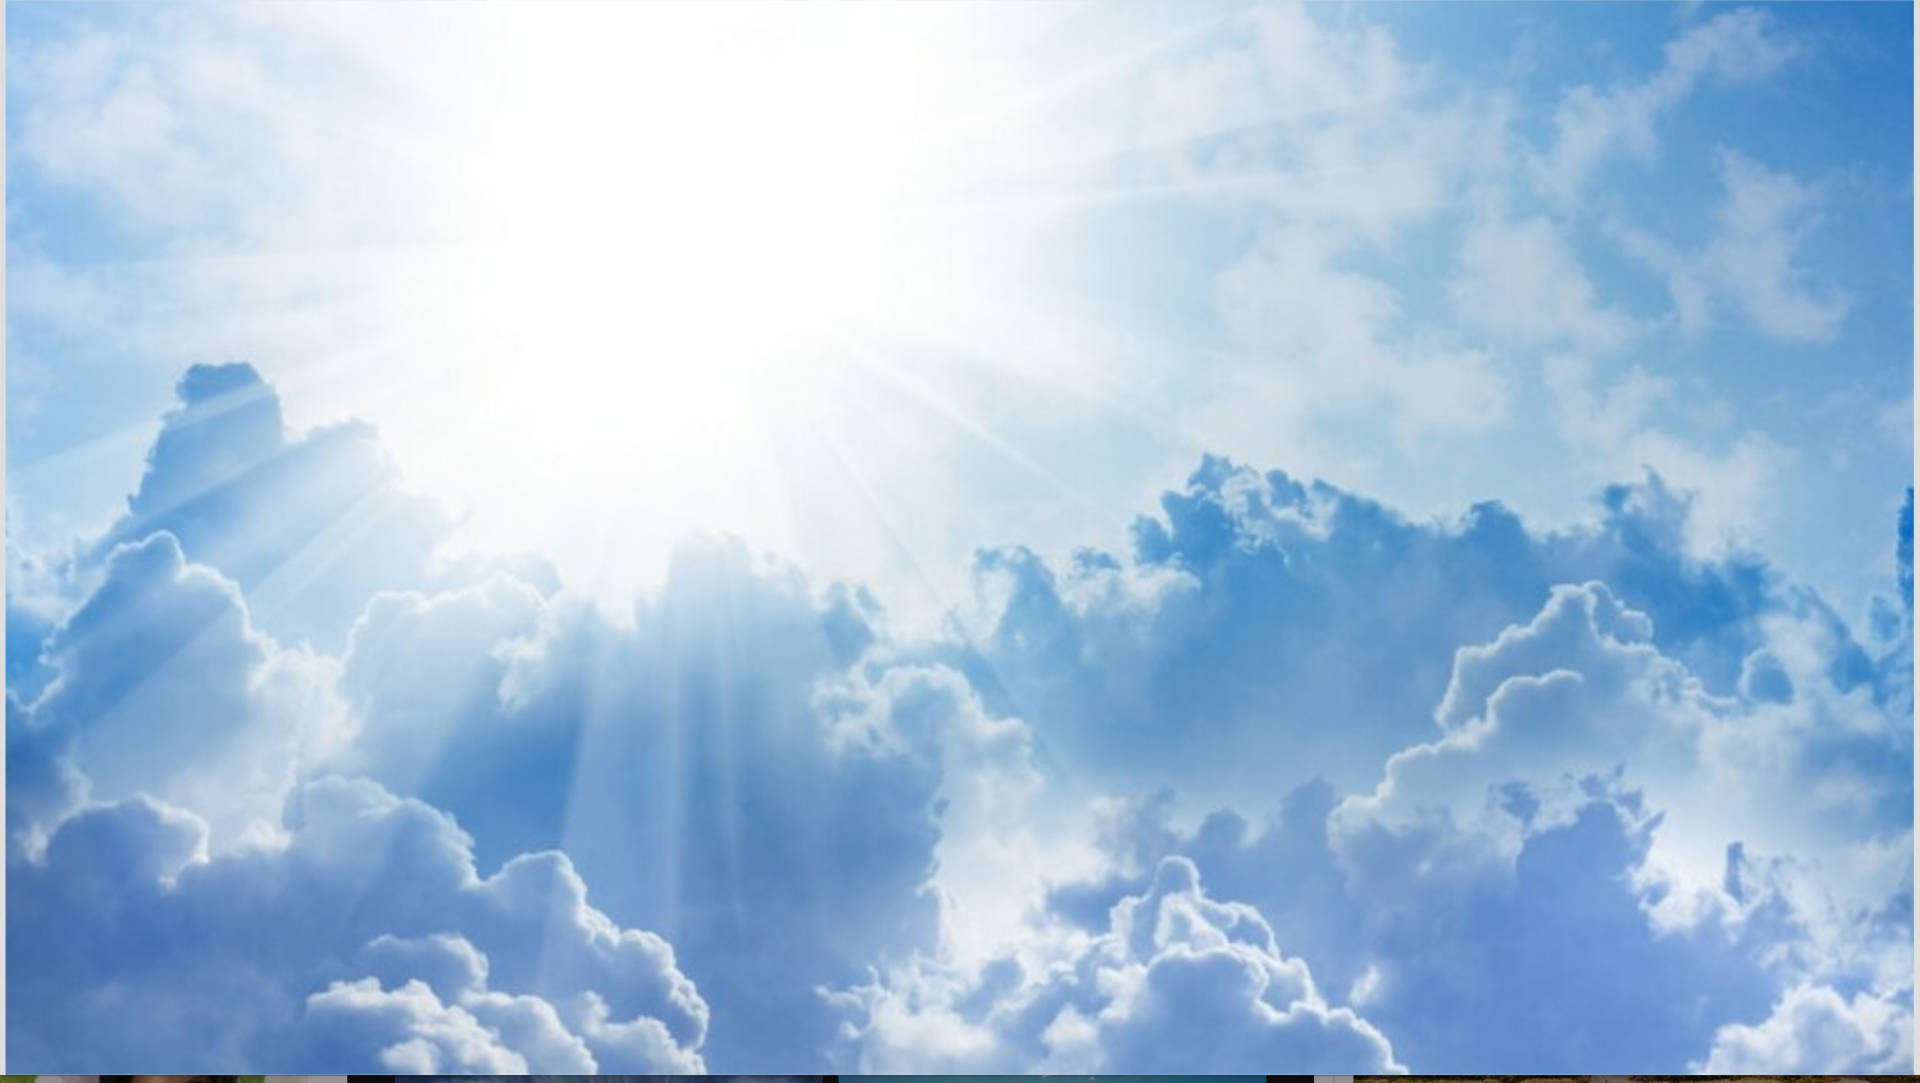 Funeral Clouds With Bright Sunrays Background